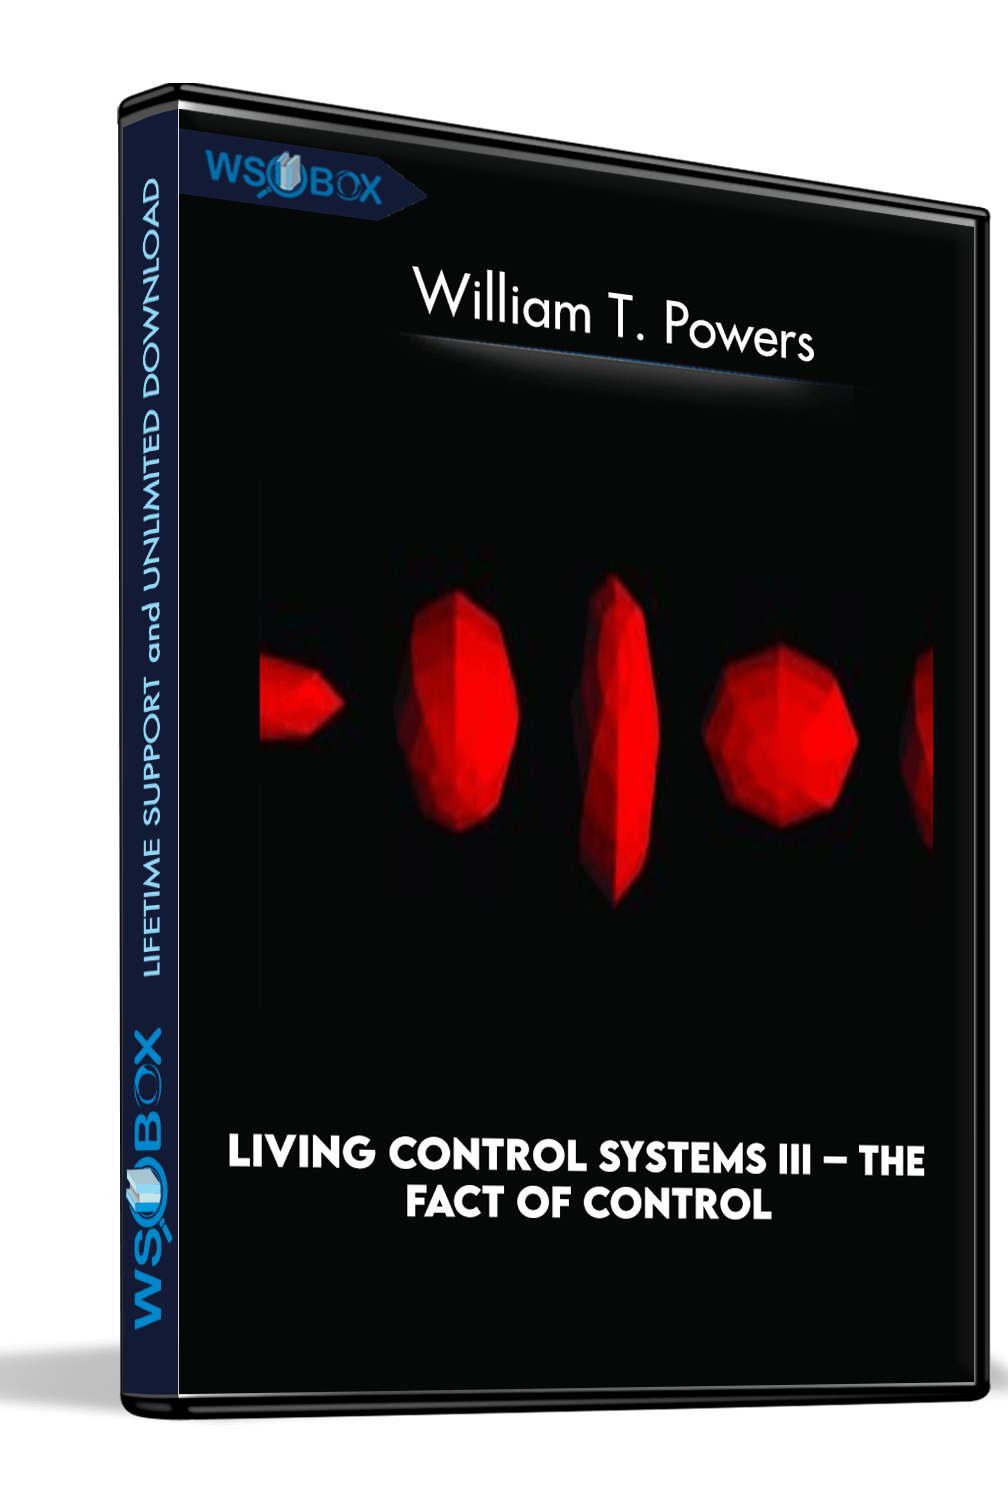 living-control-systems-iii-the-fact-of-control-william-t-powers